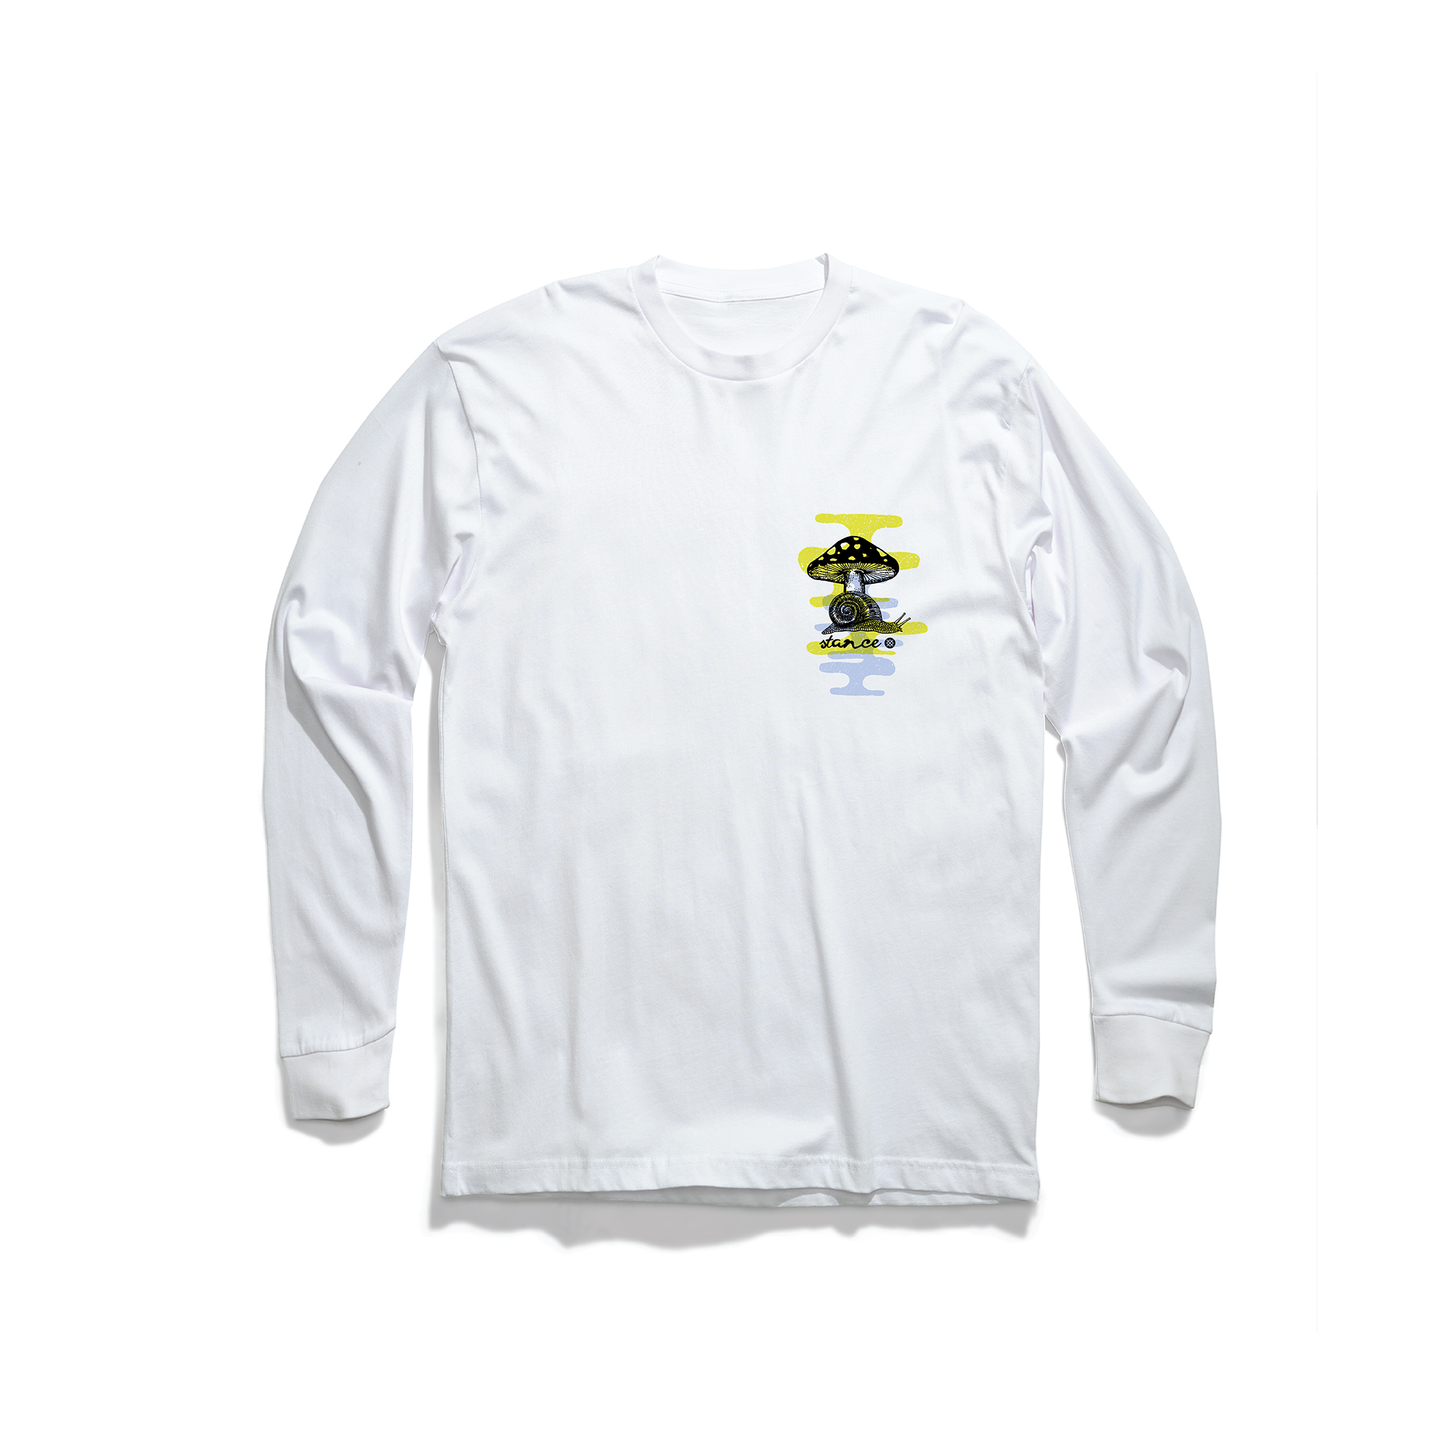 Stance Mental Growth Long Sleeve T-Shirt White